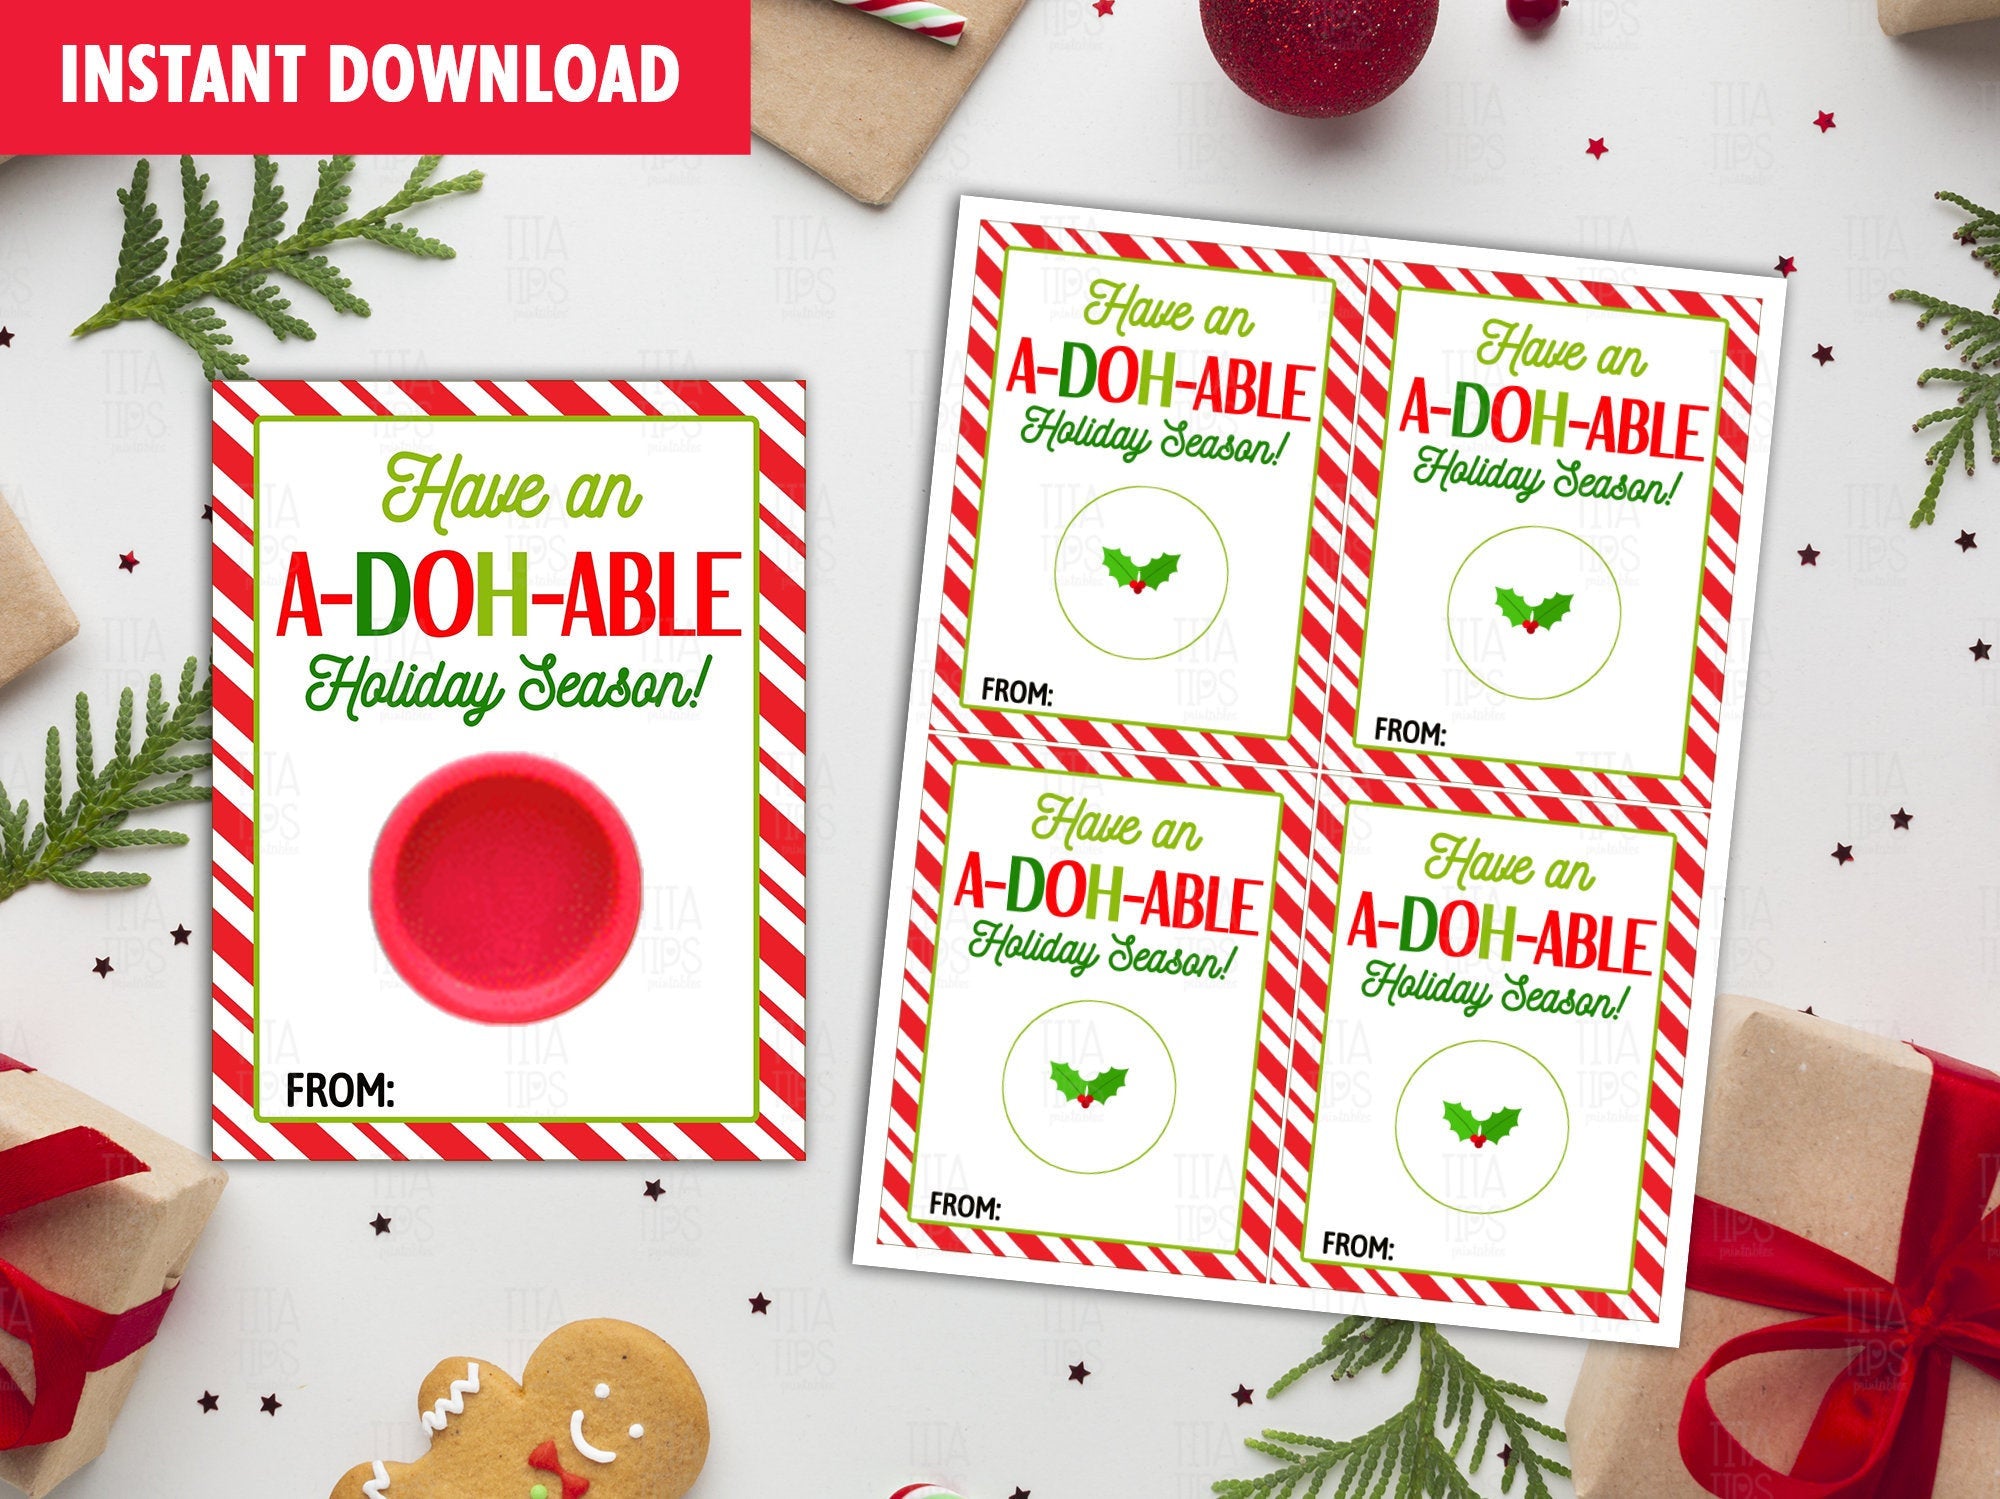 Have an A-DOH-ABLE Holiday Season! Play Dough Card DIY Printable, Exchange Tag, Neighbor Gift, Instant Download - TitaTipsPrintables